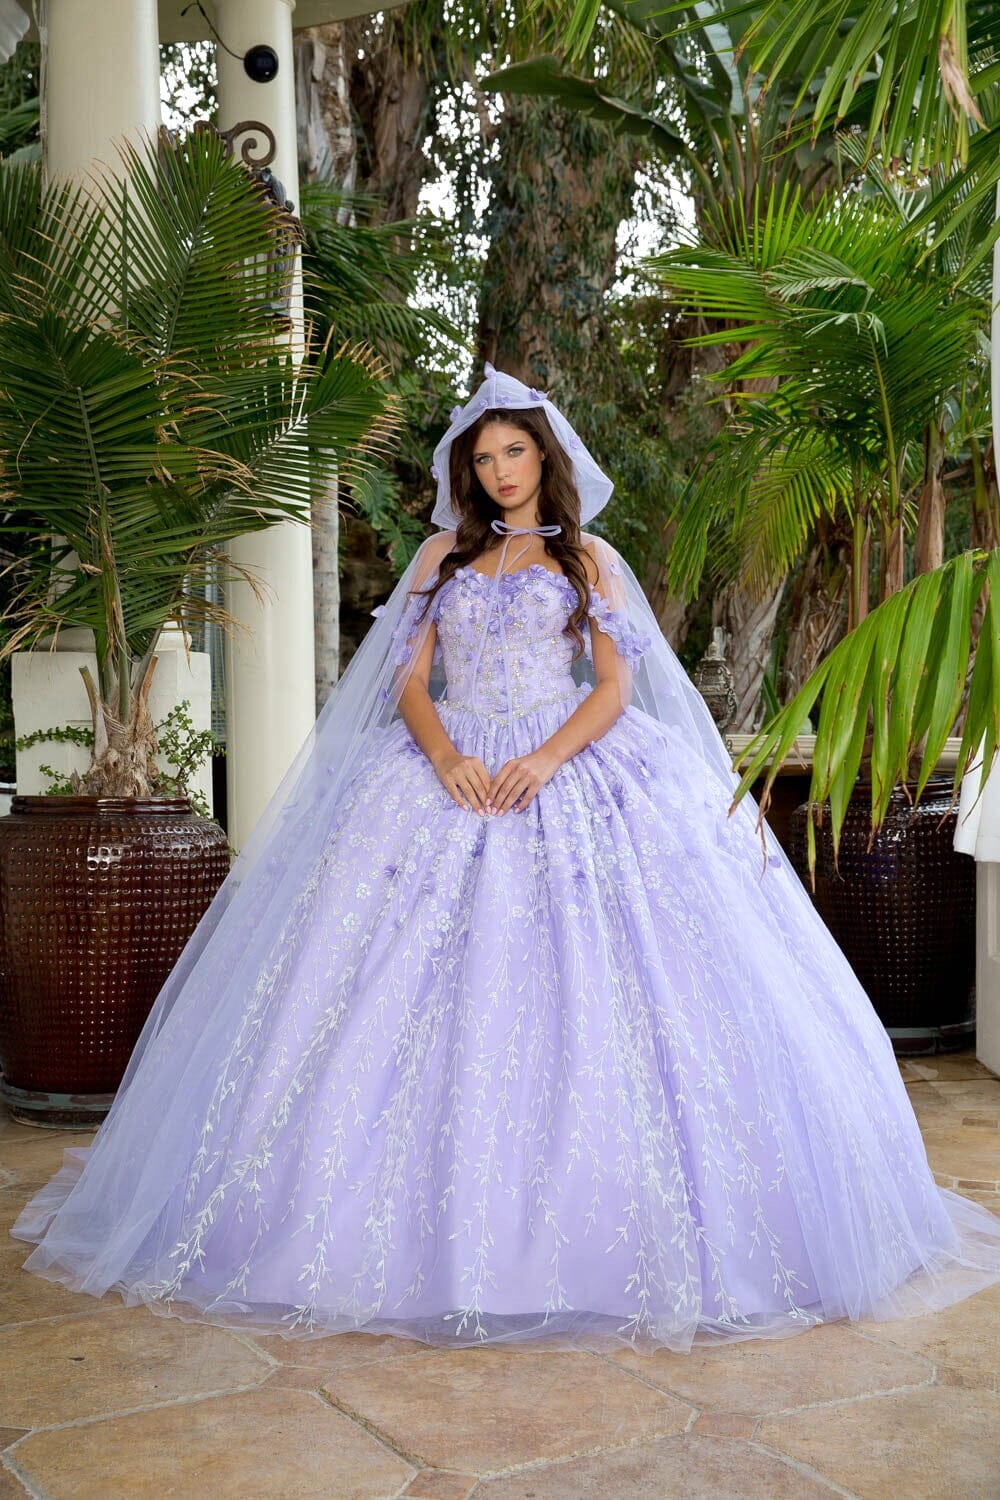 3D Floral Sweetheart Cloak Ball Gown by Petite Adele PQ1004